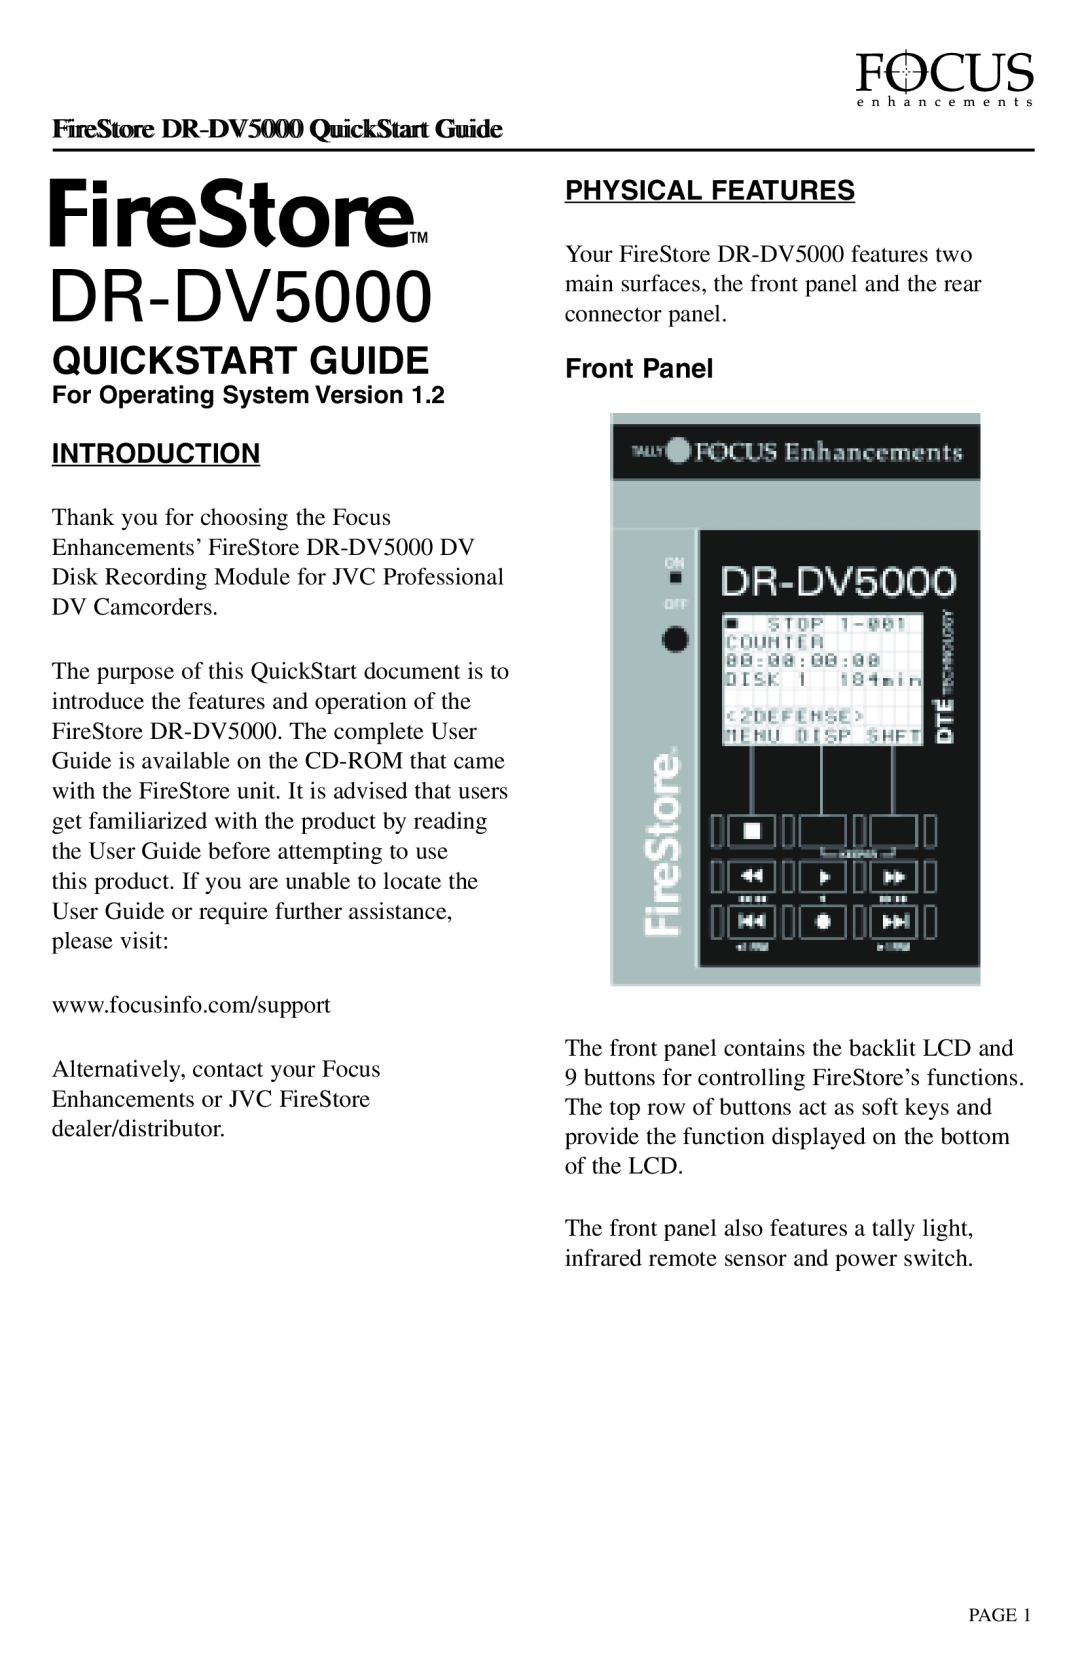 JVC DR-DV5000 quick start Introduction, Physical Features, Front Panel, For Operating System Version, Quickstart Guide 